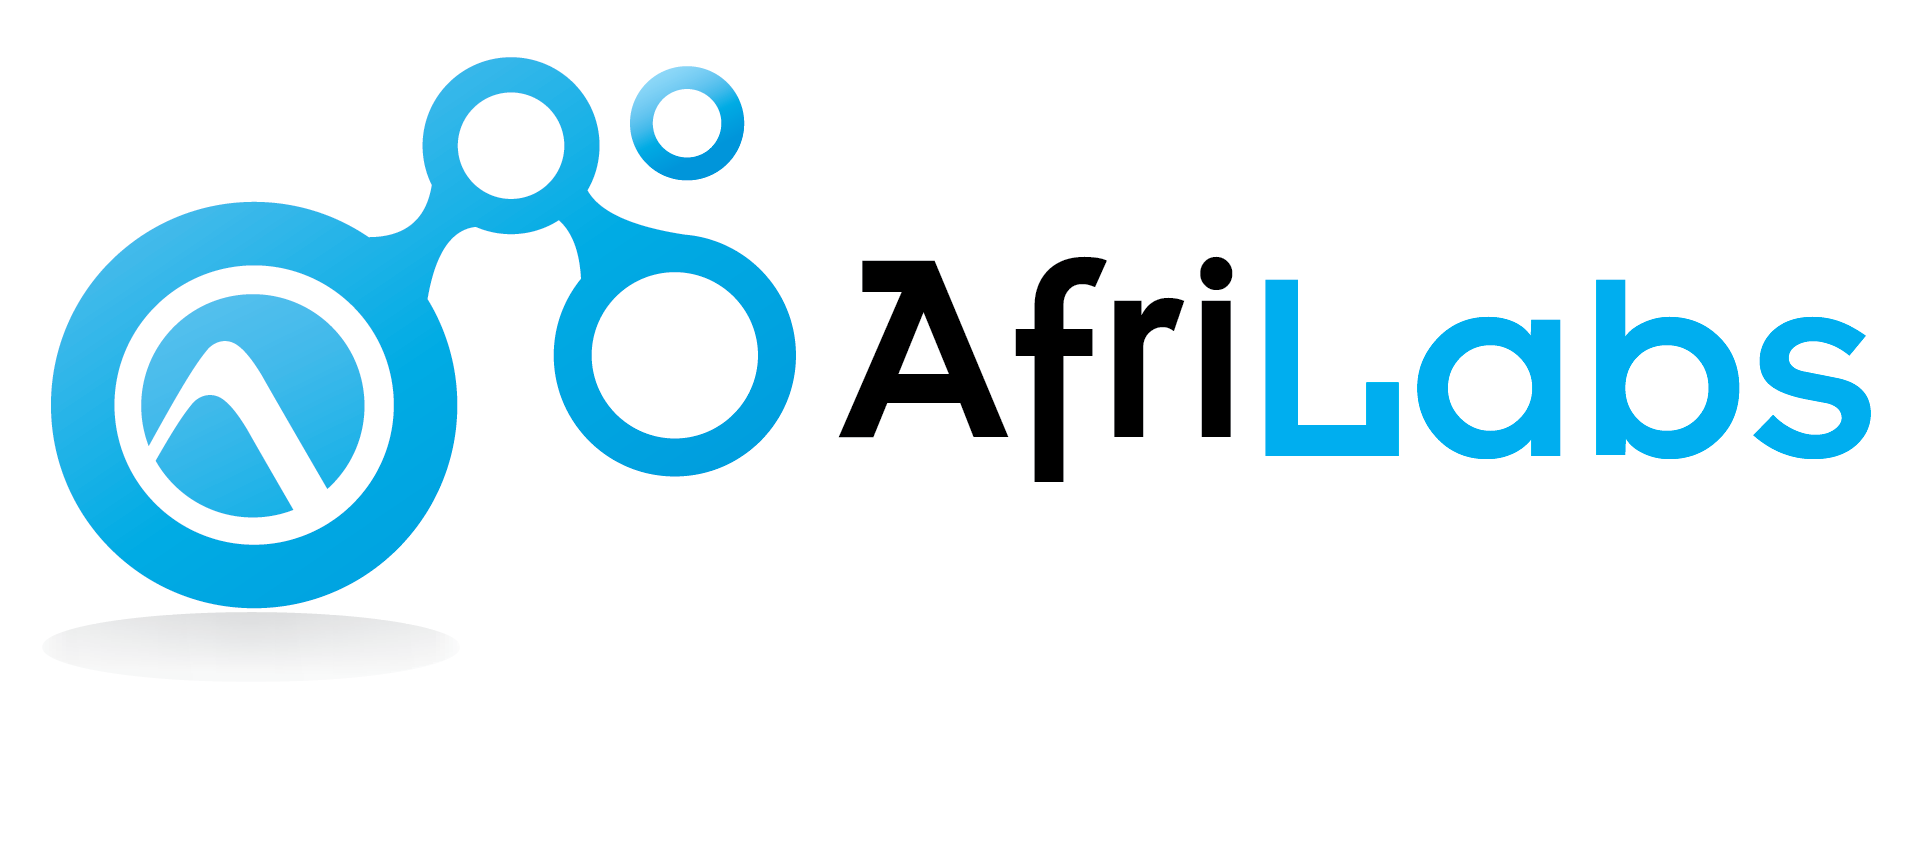 AFRILABS-A NETWORK SUPPORTING INNOVATION CENTRES ACROSS AFRICA